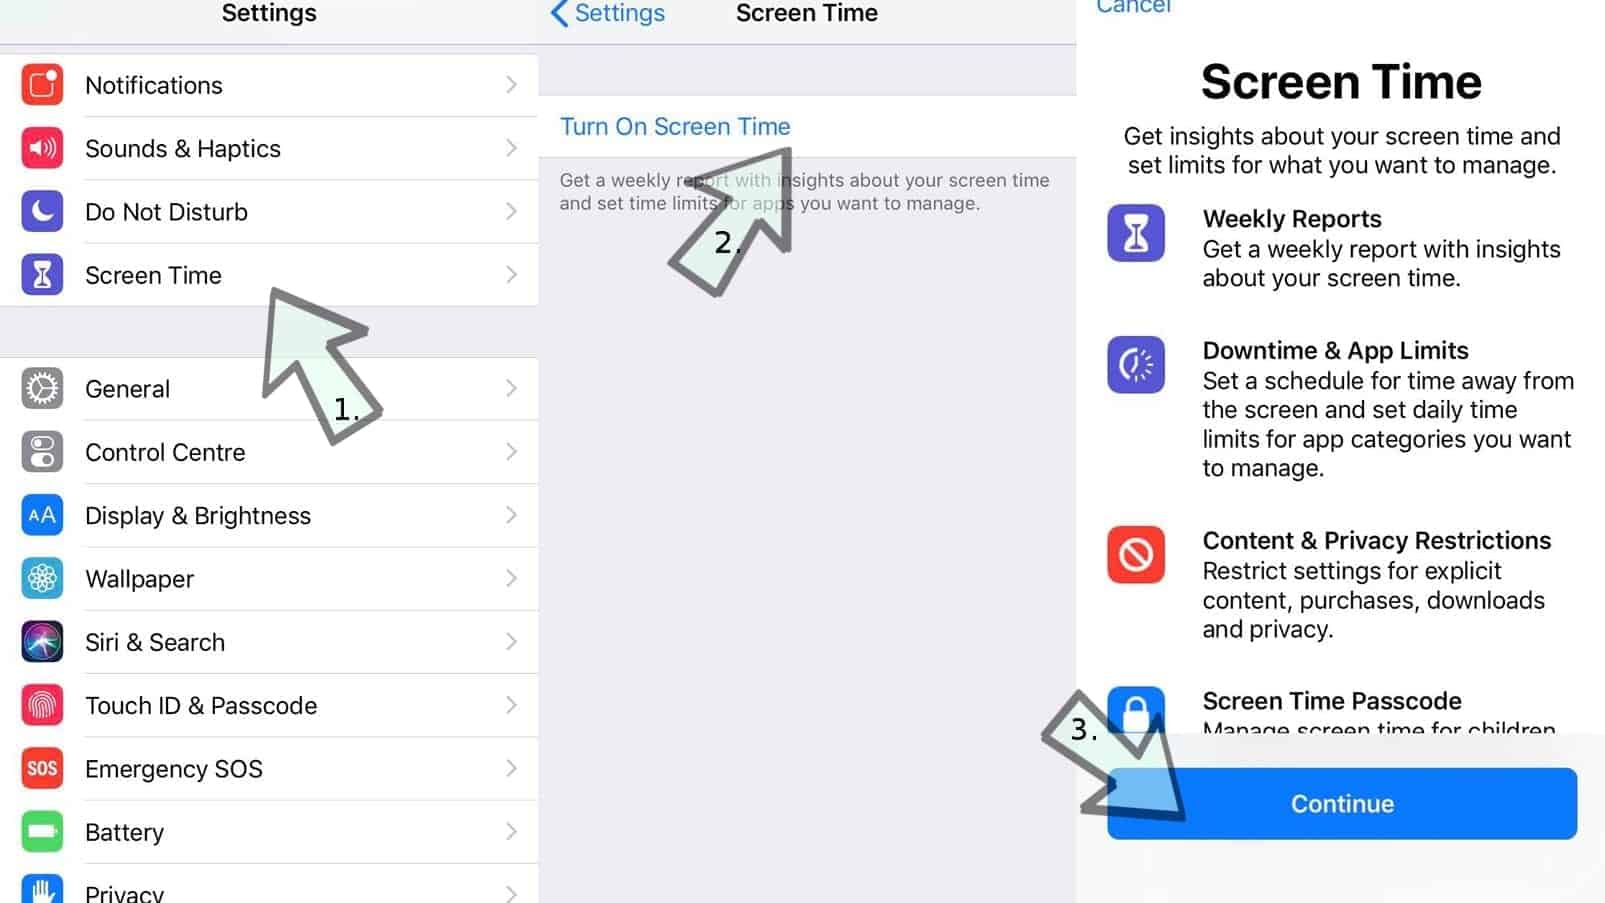 Steps to enable Screen Time in iOS12